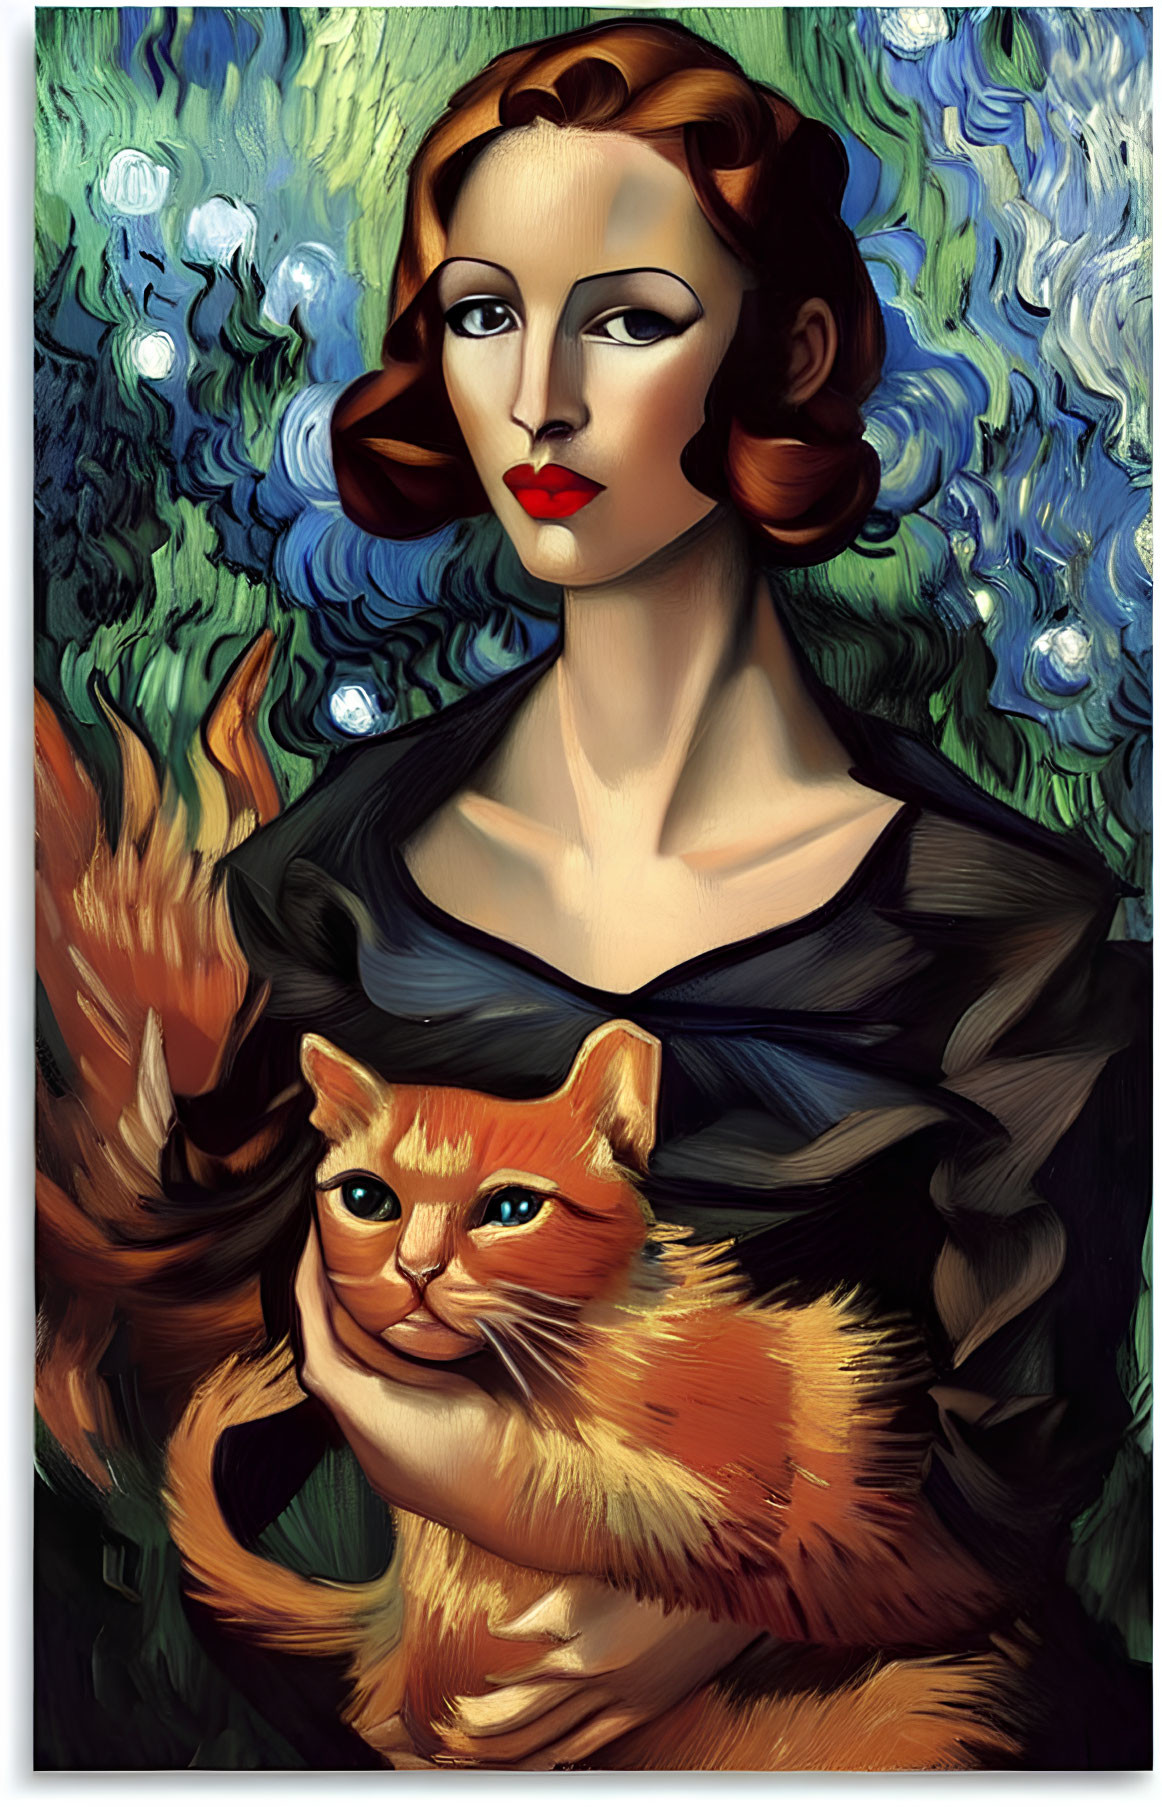 Stylized portrait of woman with wavy hair holding orange cat against Van Gogh-style background